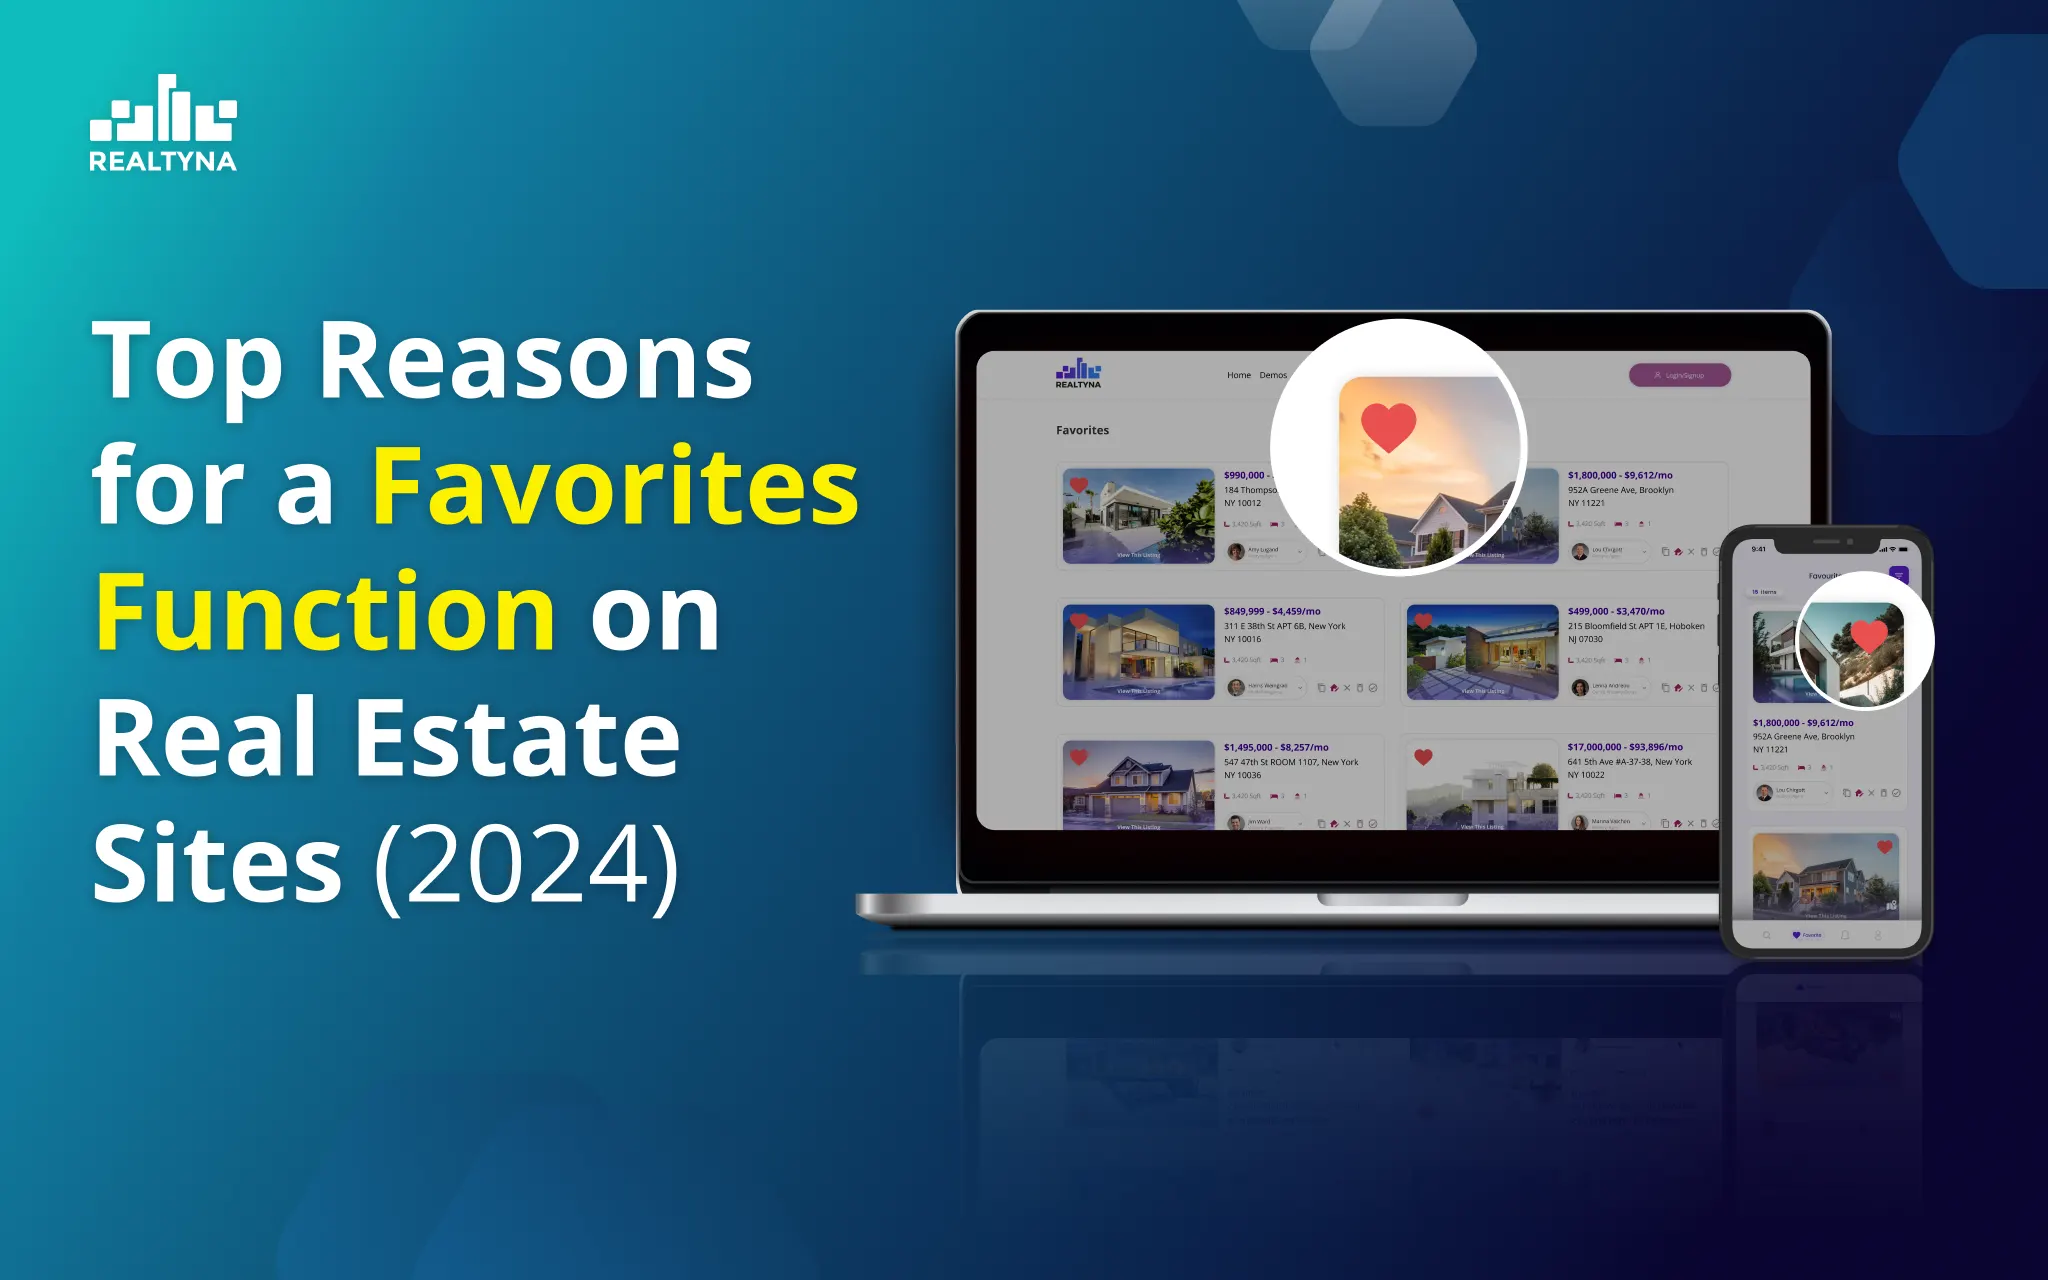 Top Reasons for a Favorites Function on Real Estate Sites (2024)